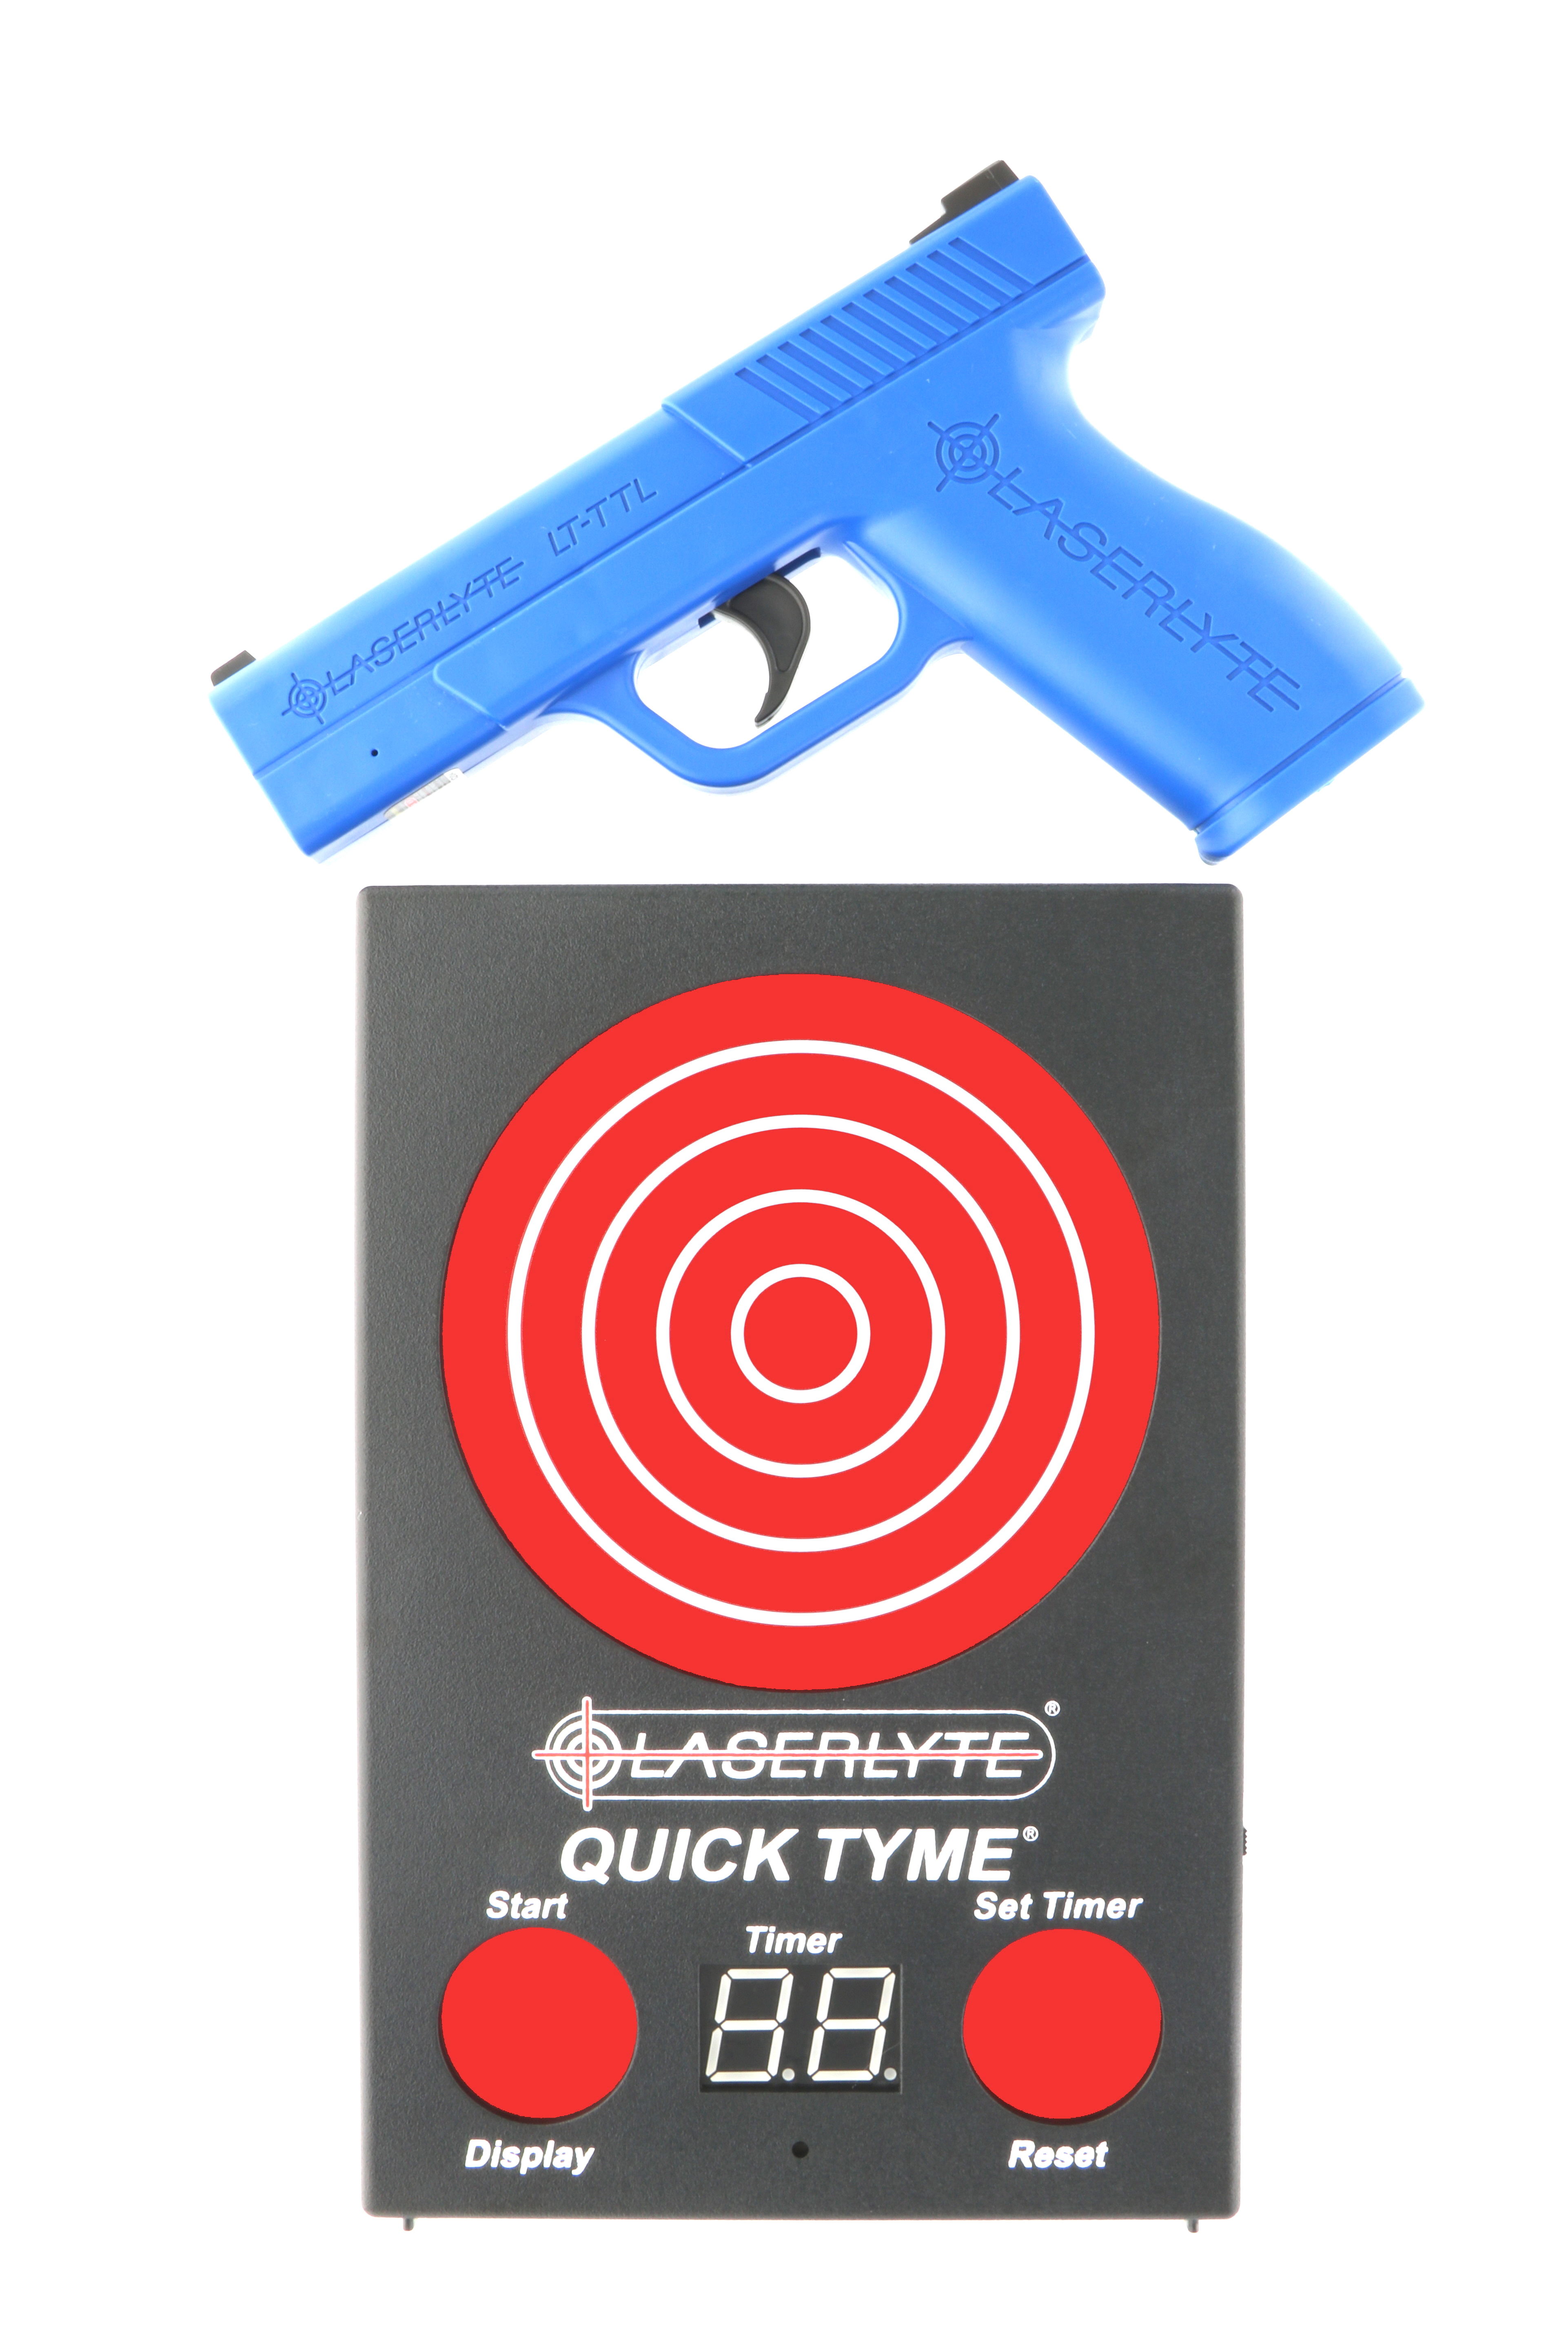 LaserLyte Quick Tyme Trainer Target Kit | 23% Off Highly Rated w 